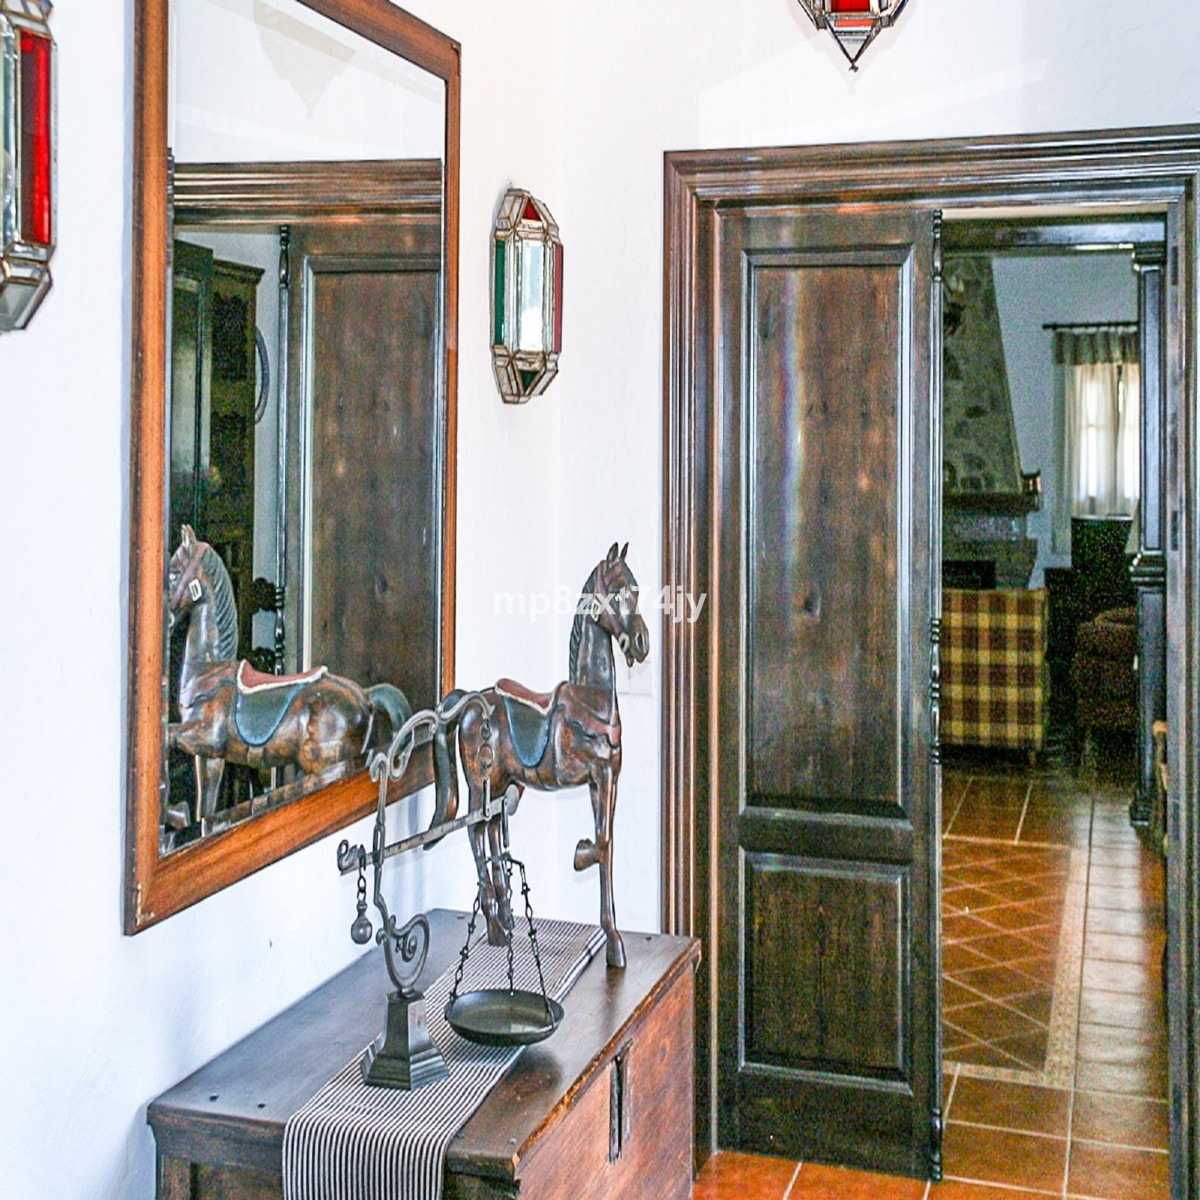 Huis in Canillas de Aceituno, Andalusië 11264278